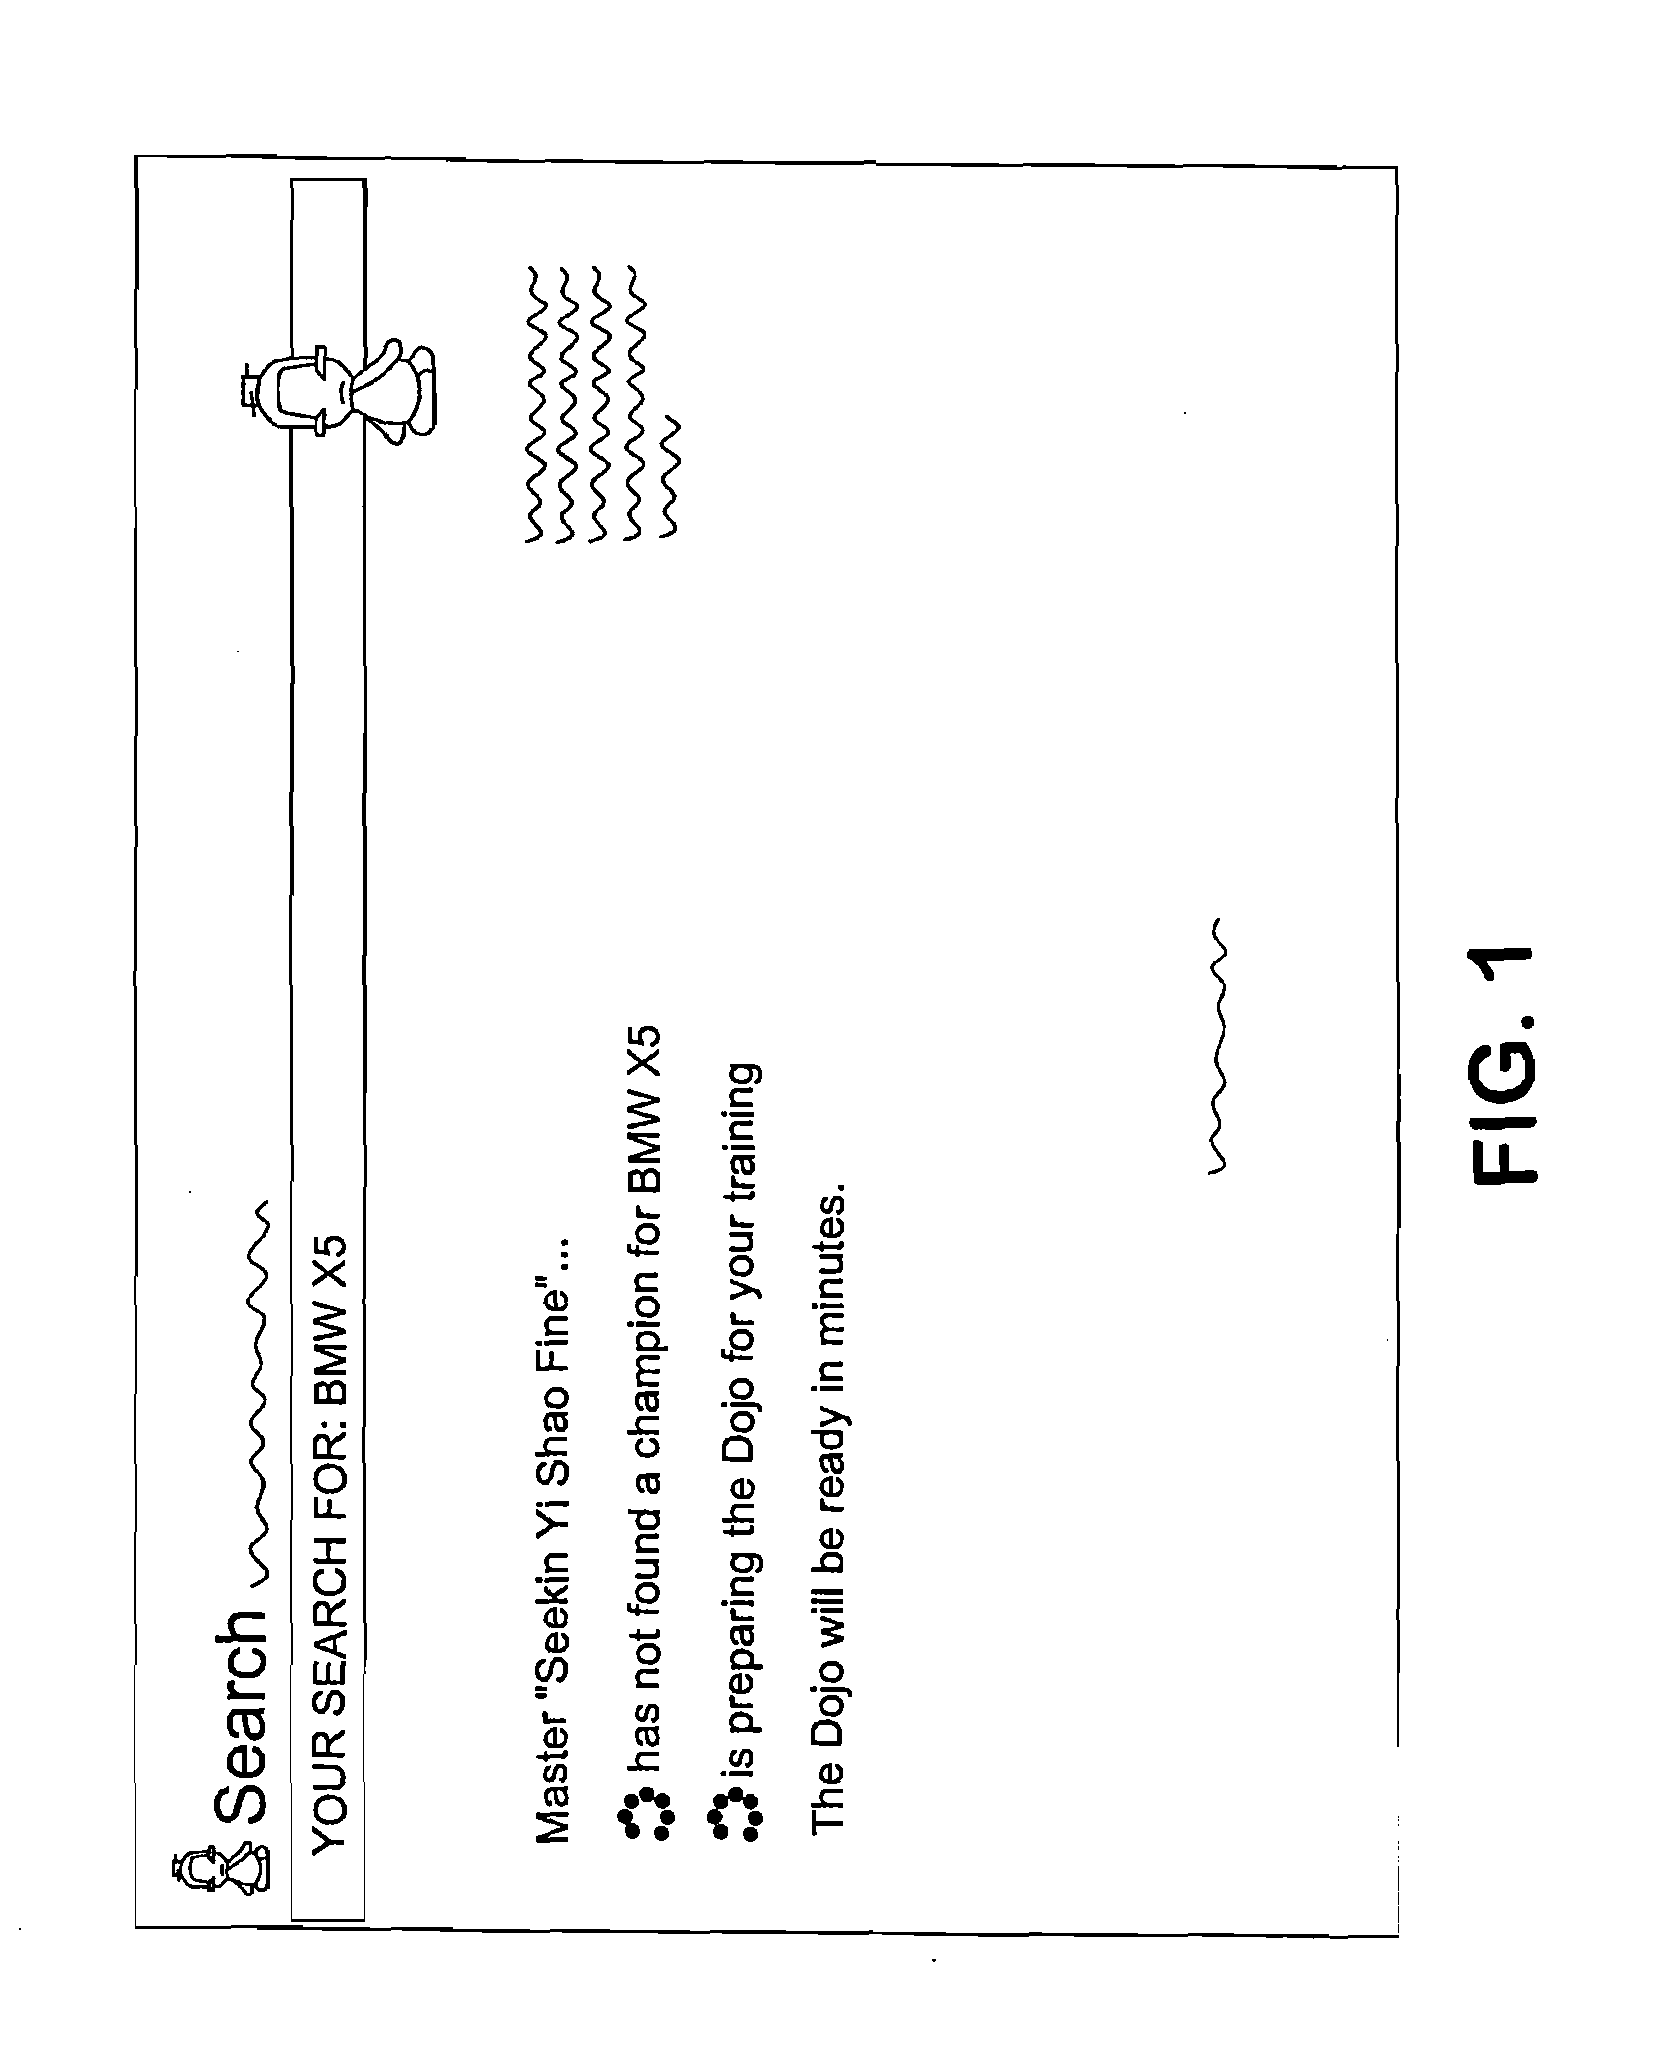 System and Method For Providing Expert Search In A Modular Computing System